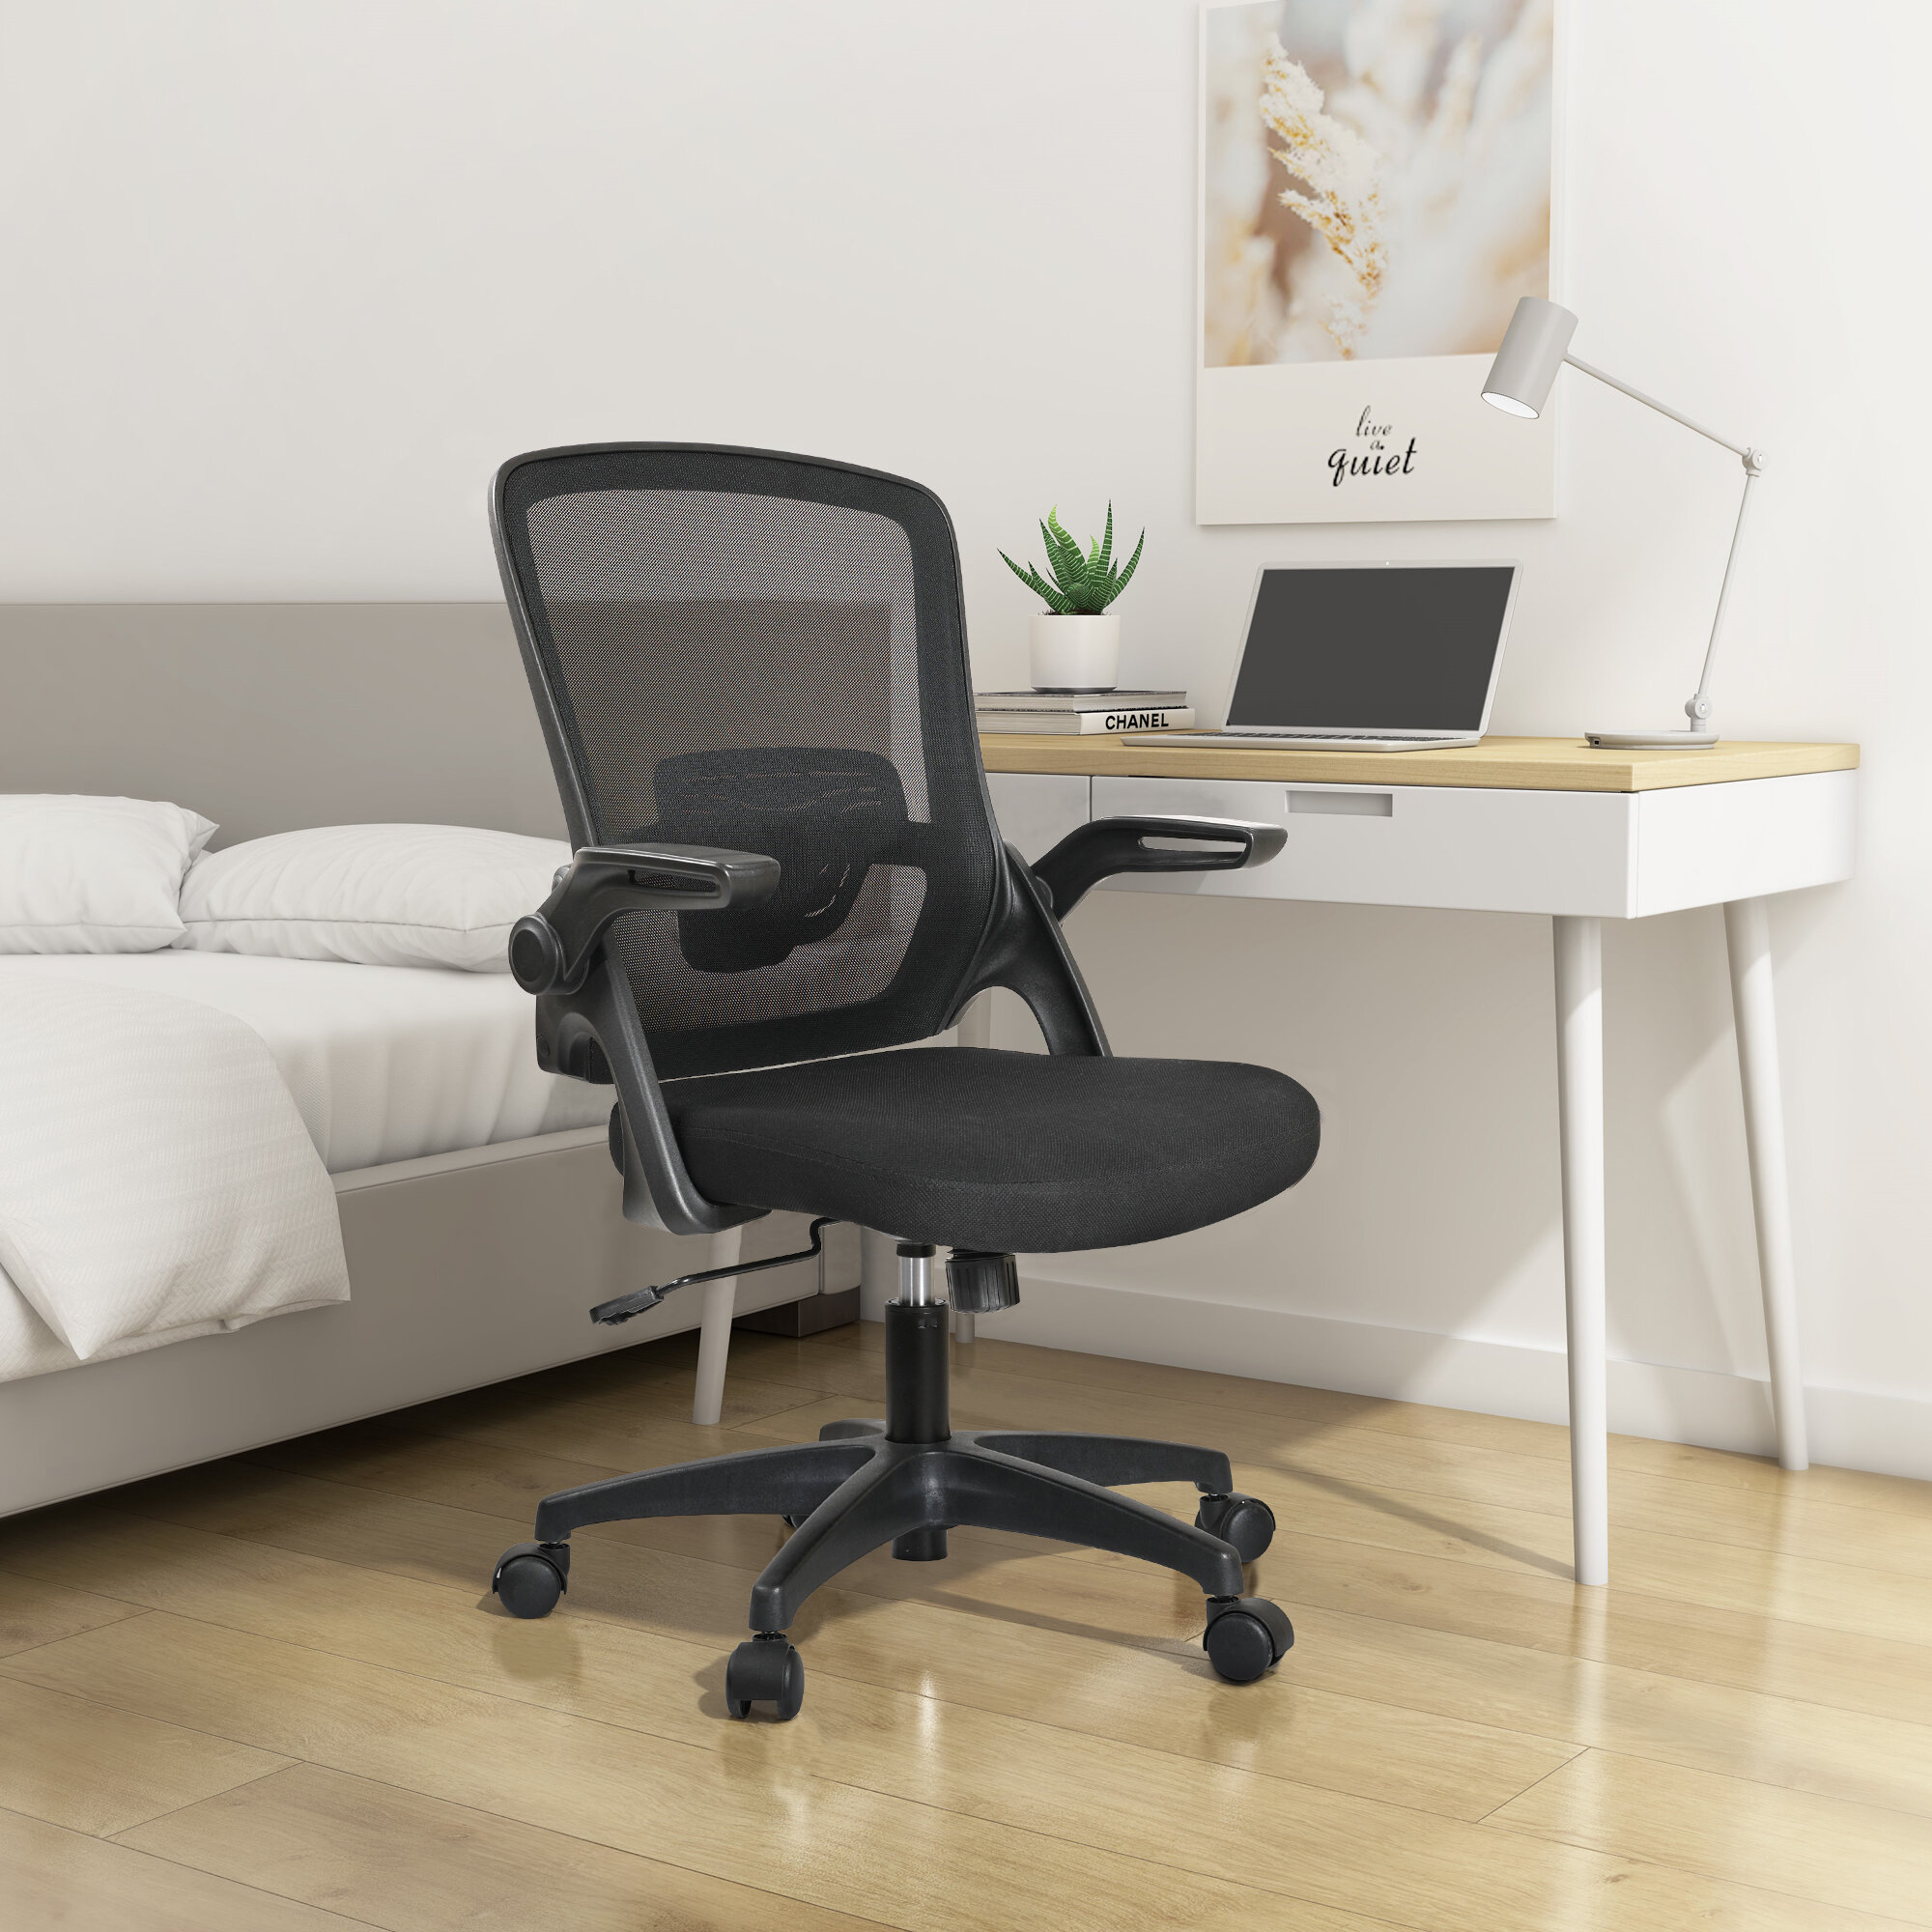 Details about   FREE SHIPPING Computer Office CHAIR with swivel and mesh back All Colors 